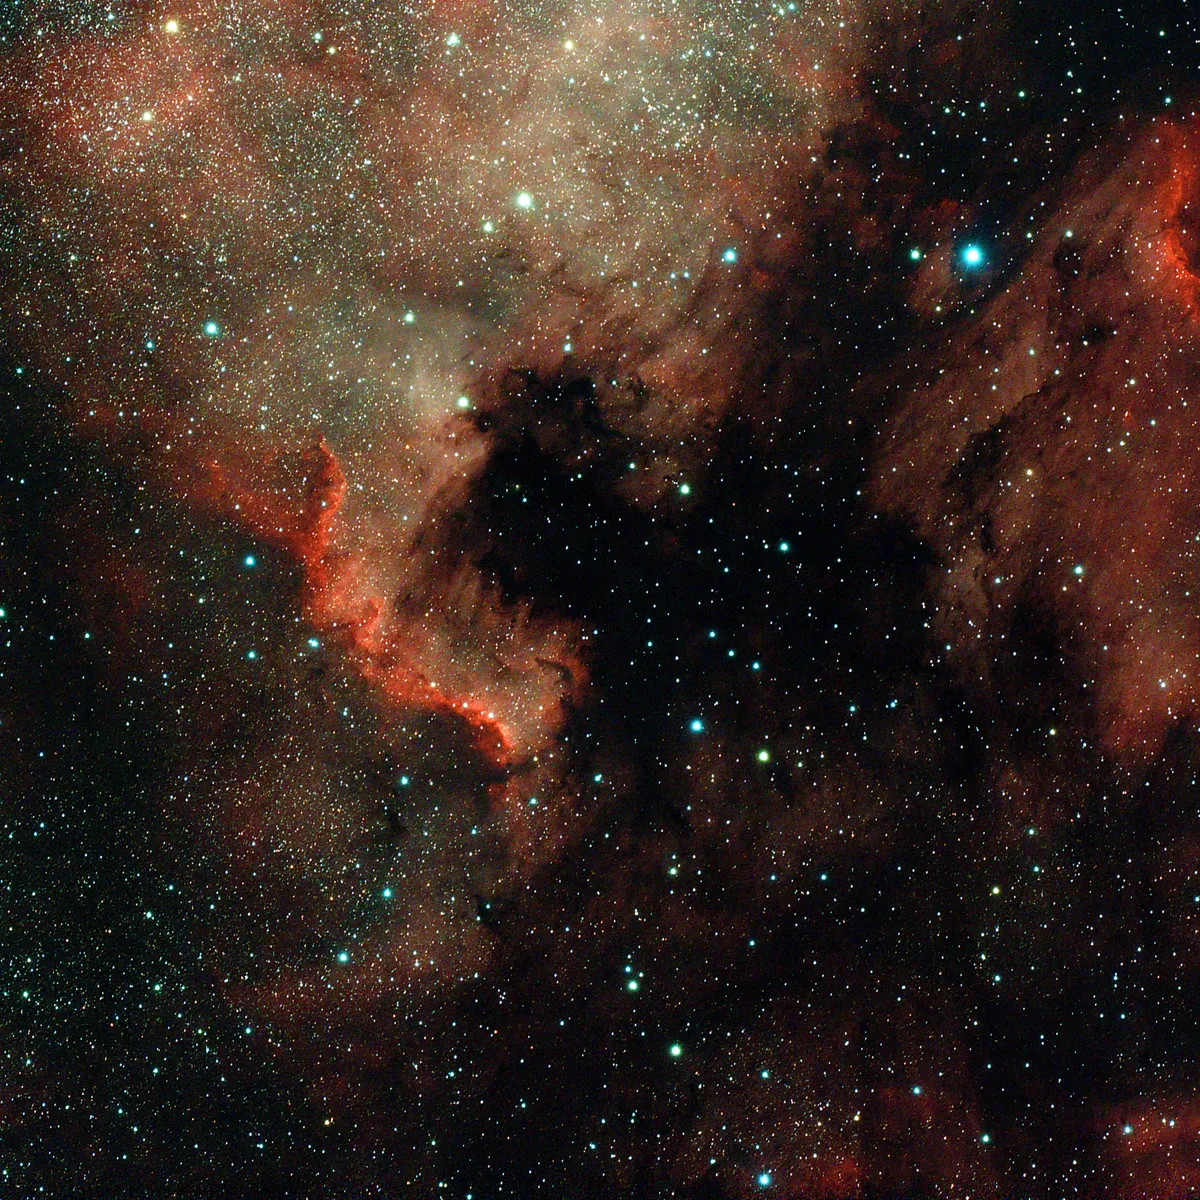 North America and Pelican Nebulae by Kevin Gurney, Port Punay, nr La Rochelle, France. Equipment: William Optics Star 71, Canon 600D (modified), Astrotrac TT320X-AG with pier, wedge and counterweight, IDAS LPS D1 filter